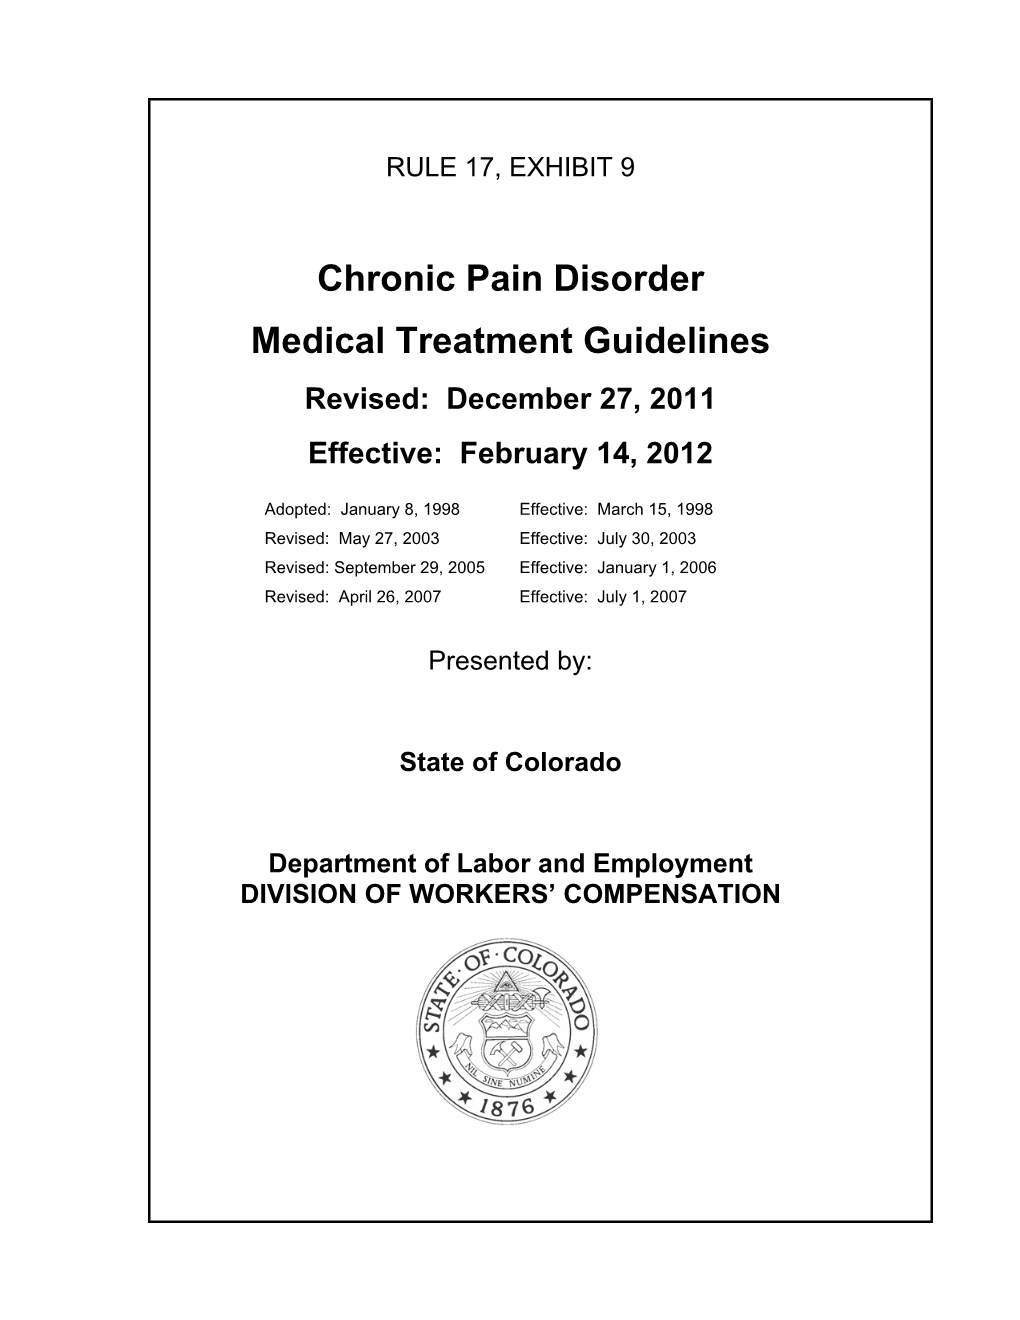 Chronic Pain Disorder Medical Treatment Guidelines Revised: December 27, 2011 Effective: February 14, 2012